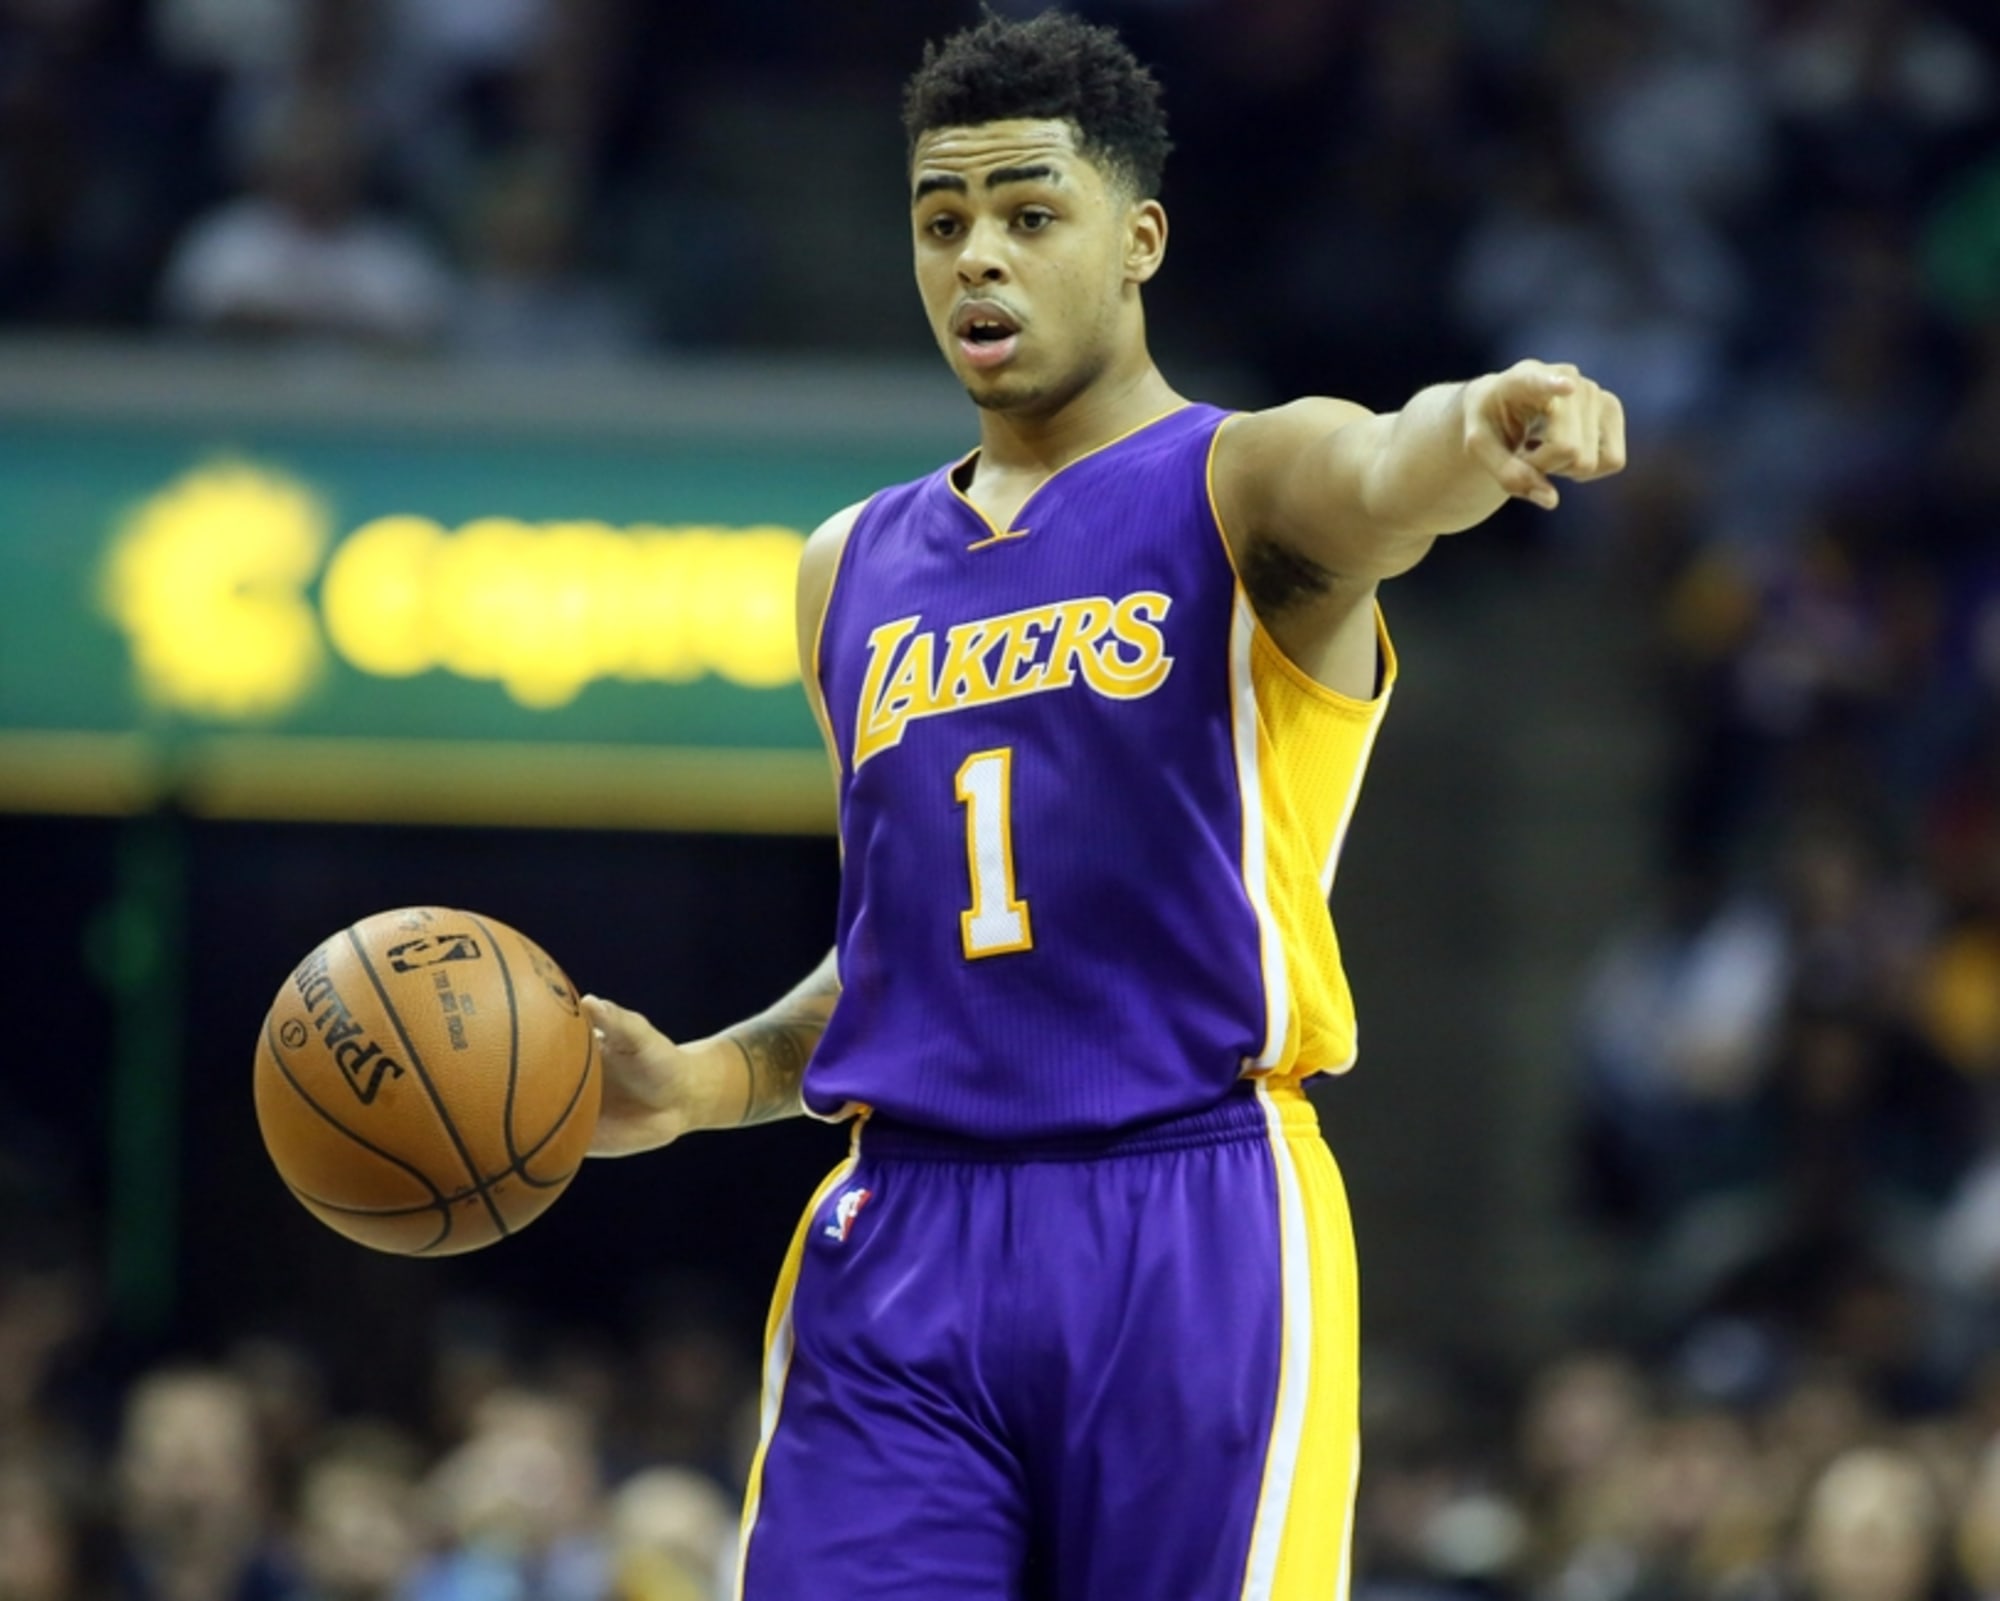 D'Angelo Russell: All about the effort